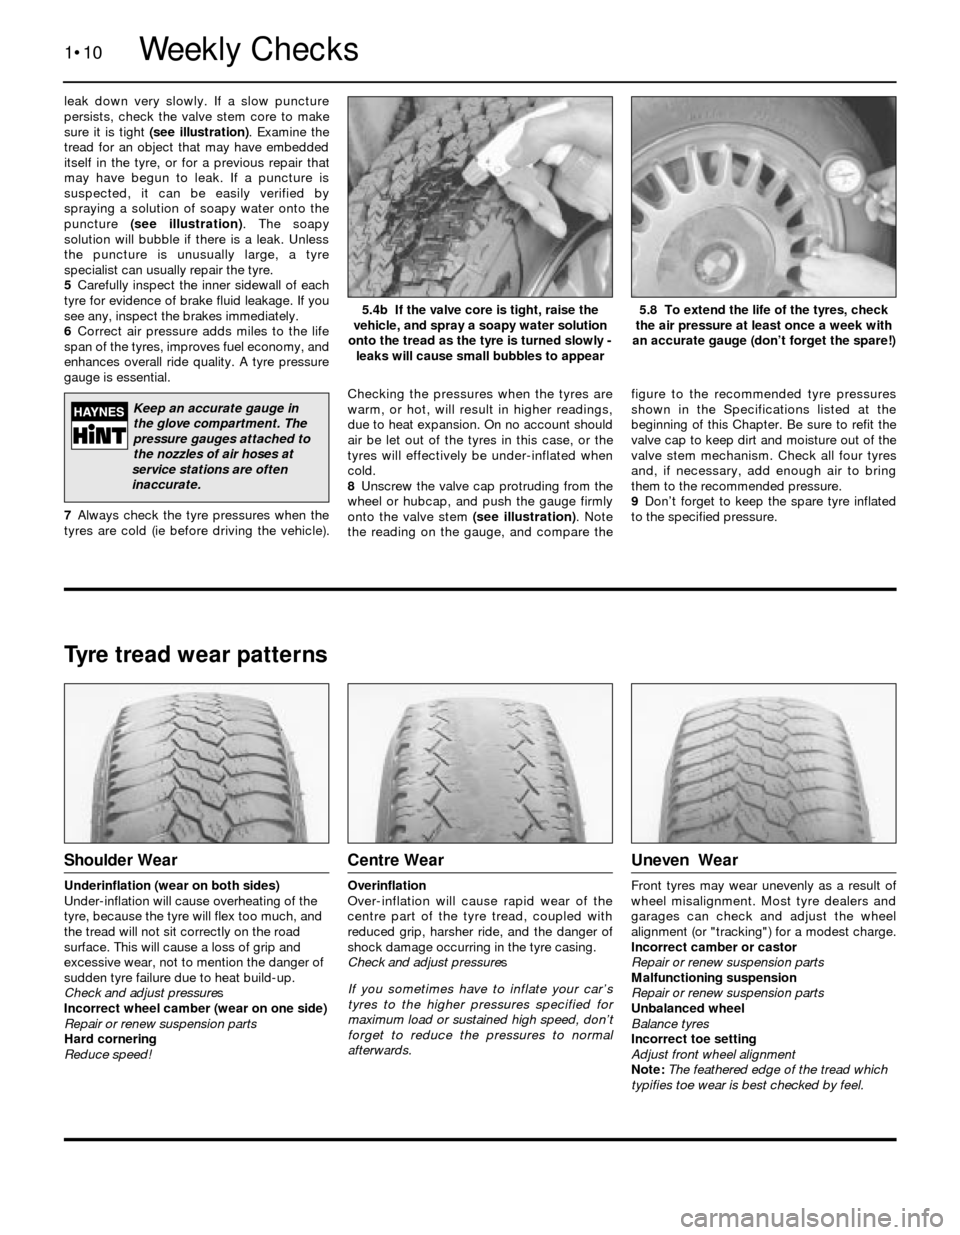 BMW 5 SERIES 1989 E34 Workshop Manual leak down very slowly. If a slow puncture
persists, check the valve stem core to make
sure it is tight (see illustration). Examine the
tread for an object that may have embedded
itself in the tyre, or